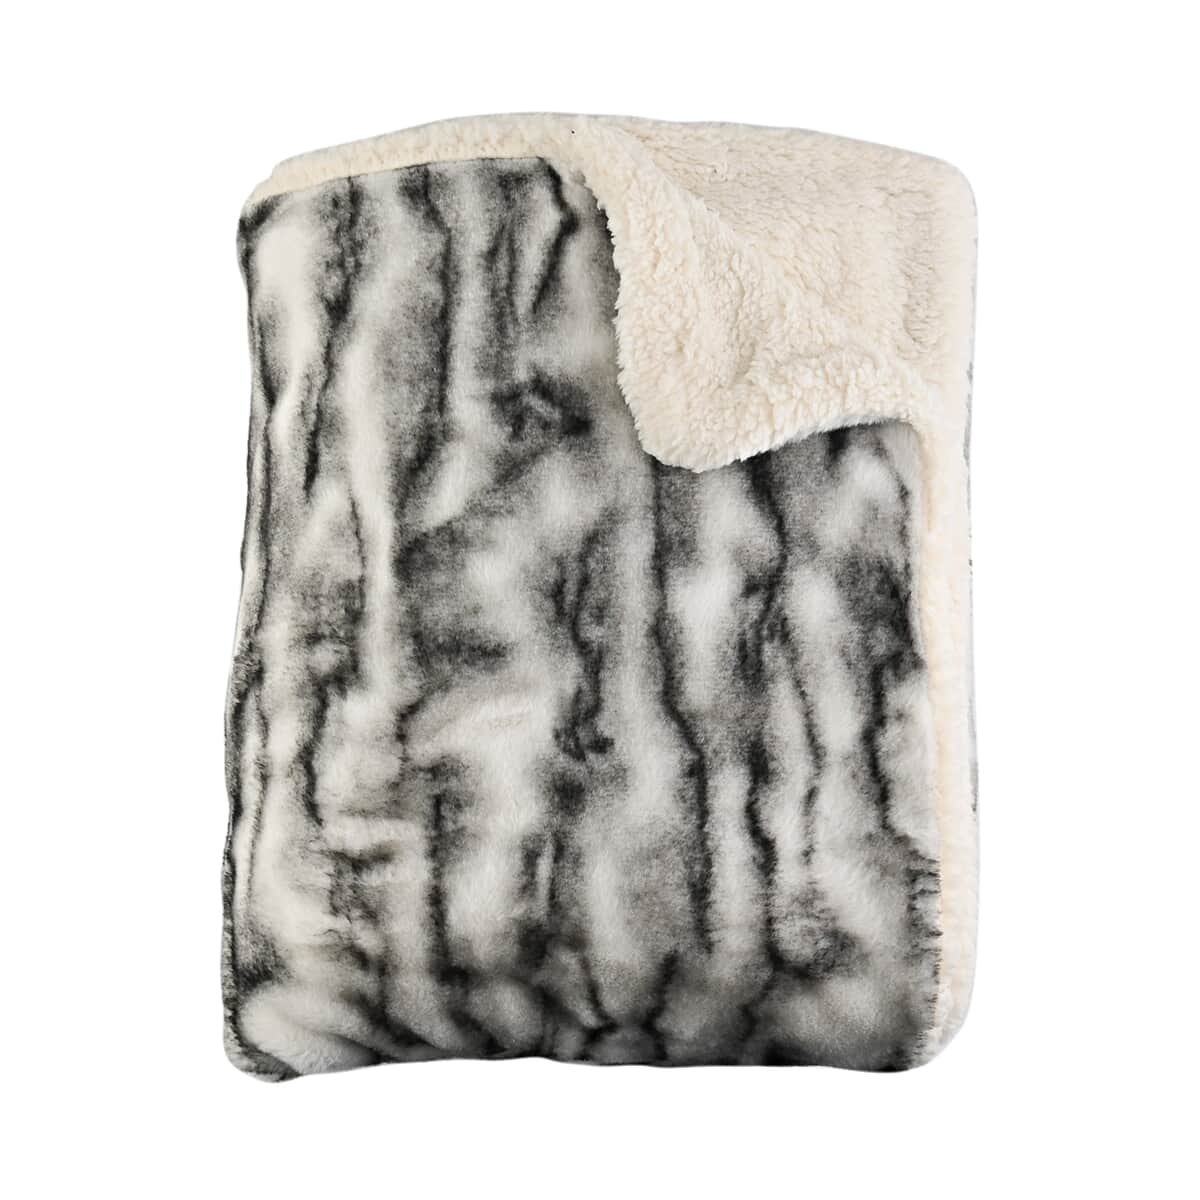 HOMESMART Black and White Cozy Faux Fur Sherpa Blanket (59"x78") image number 1